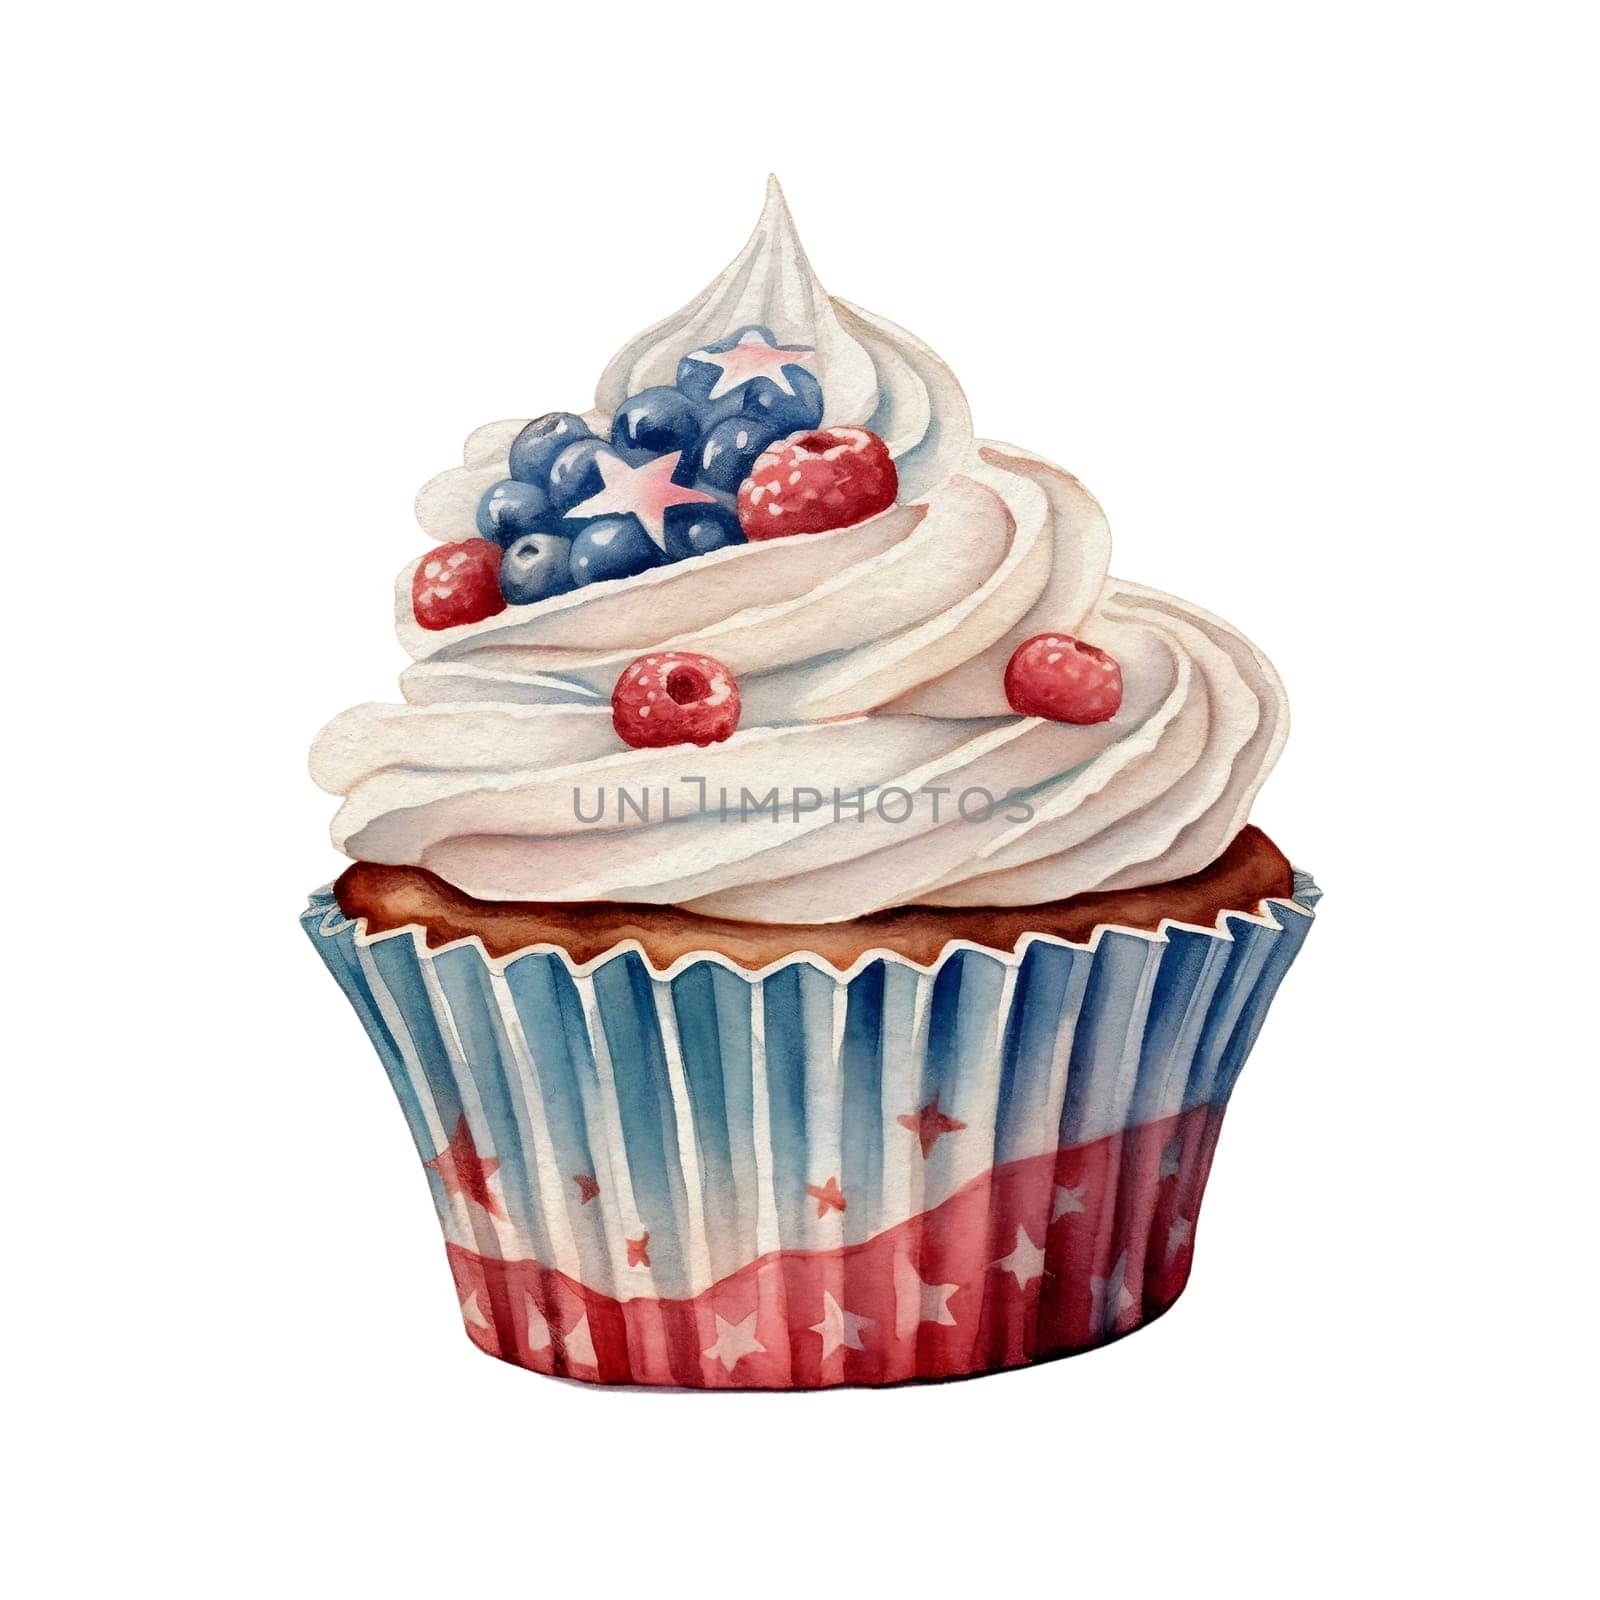 Watercolor 4th of July Independence Day Party Cupcake Cosy Decoration Illustration Clipart by Skyecreativestudio